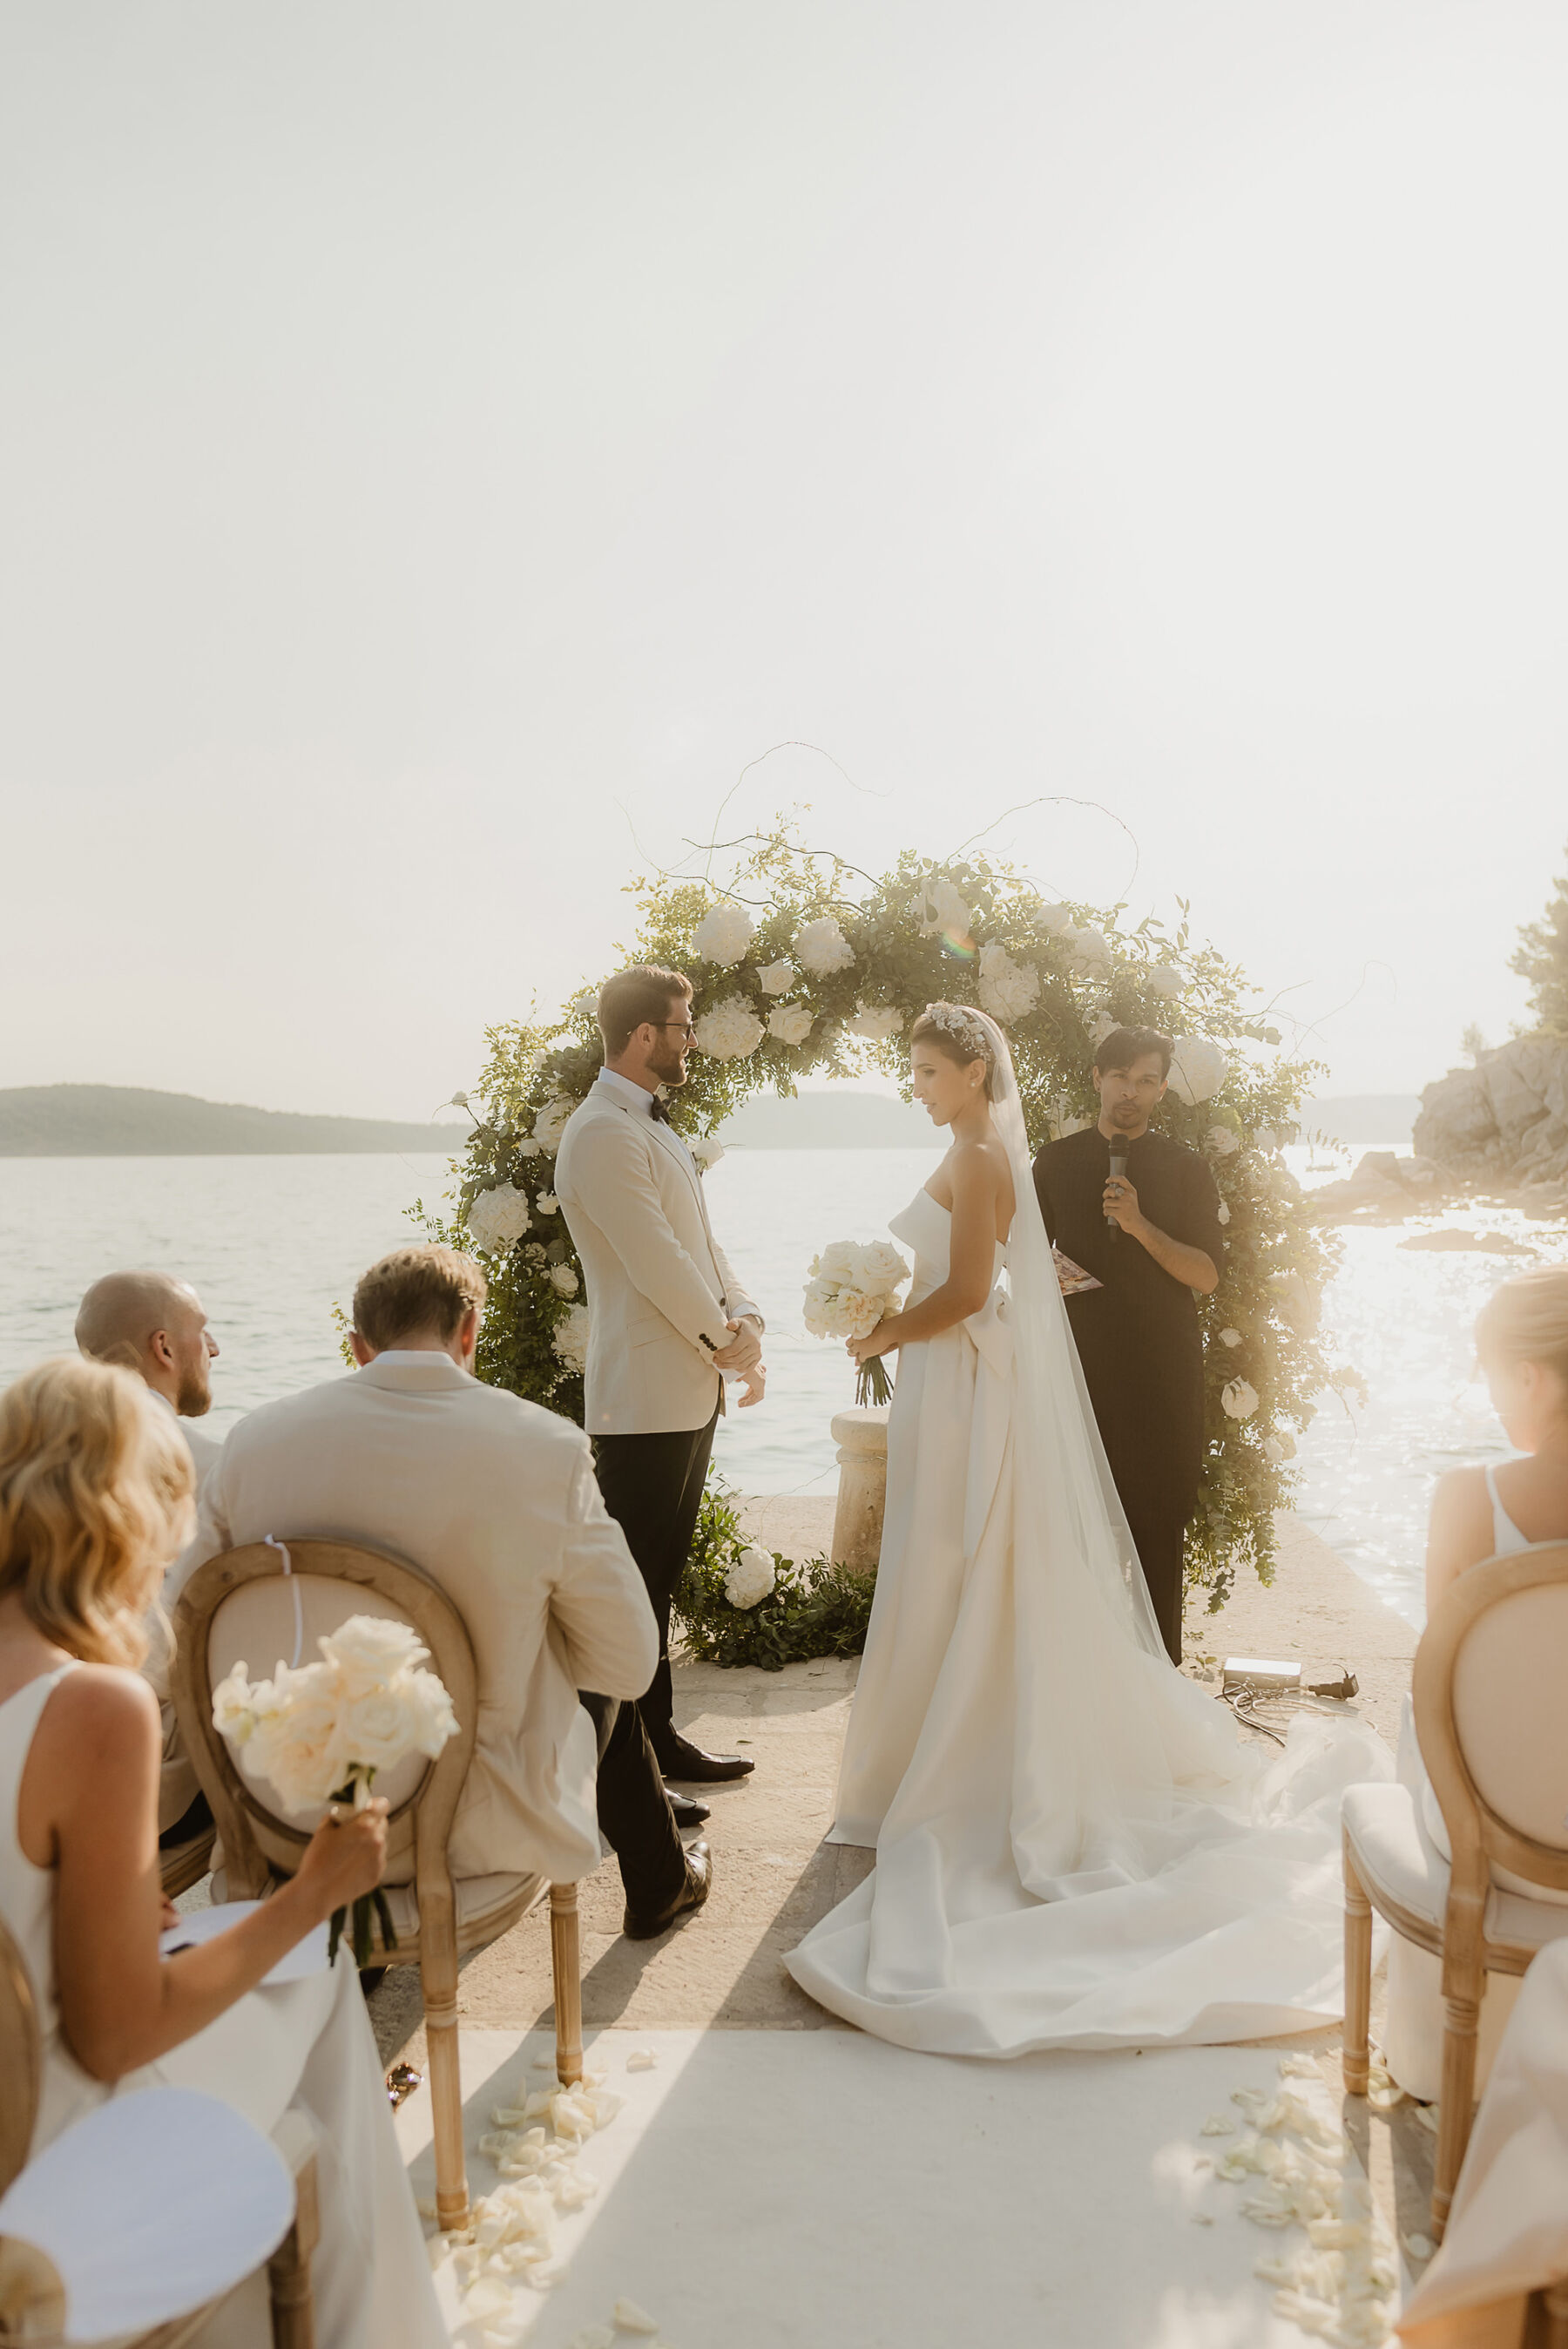 Floral arch backdrop for outdoor wedding ceremony by the sea